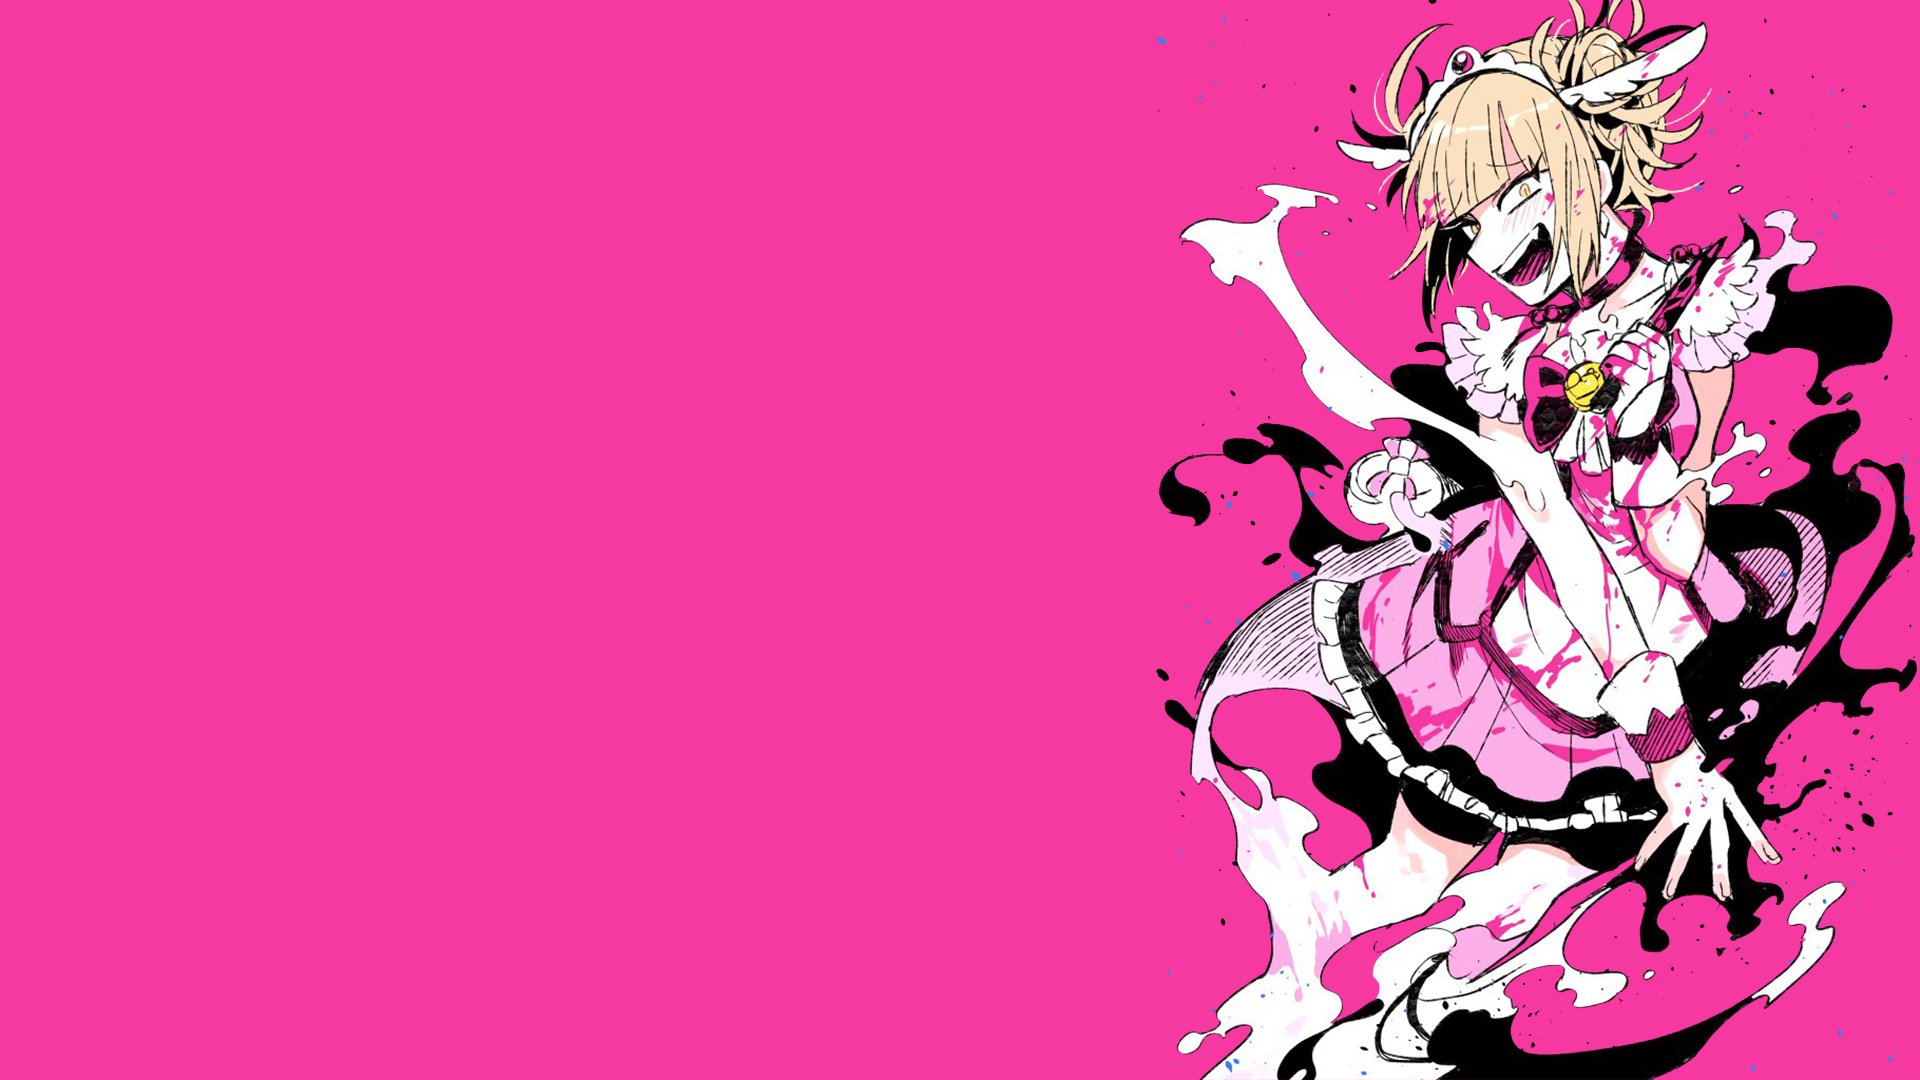 Himiko Toga Hd Wallpapers Background Images Wallpaper Abyss | My XXX ...